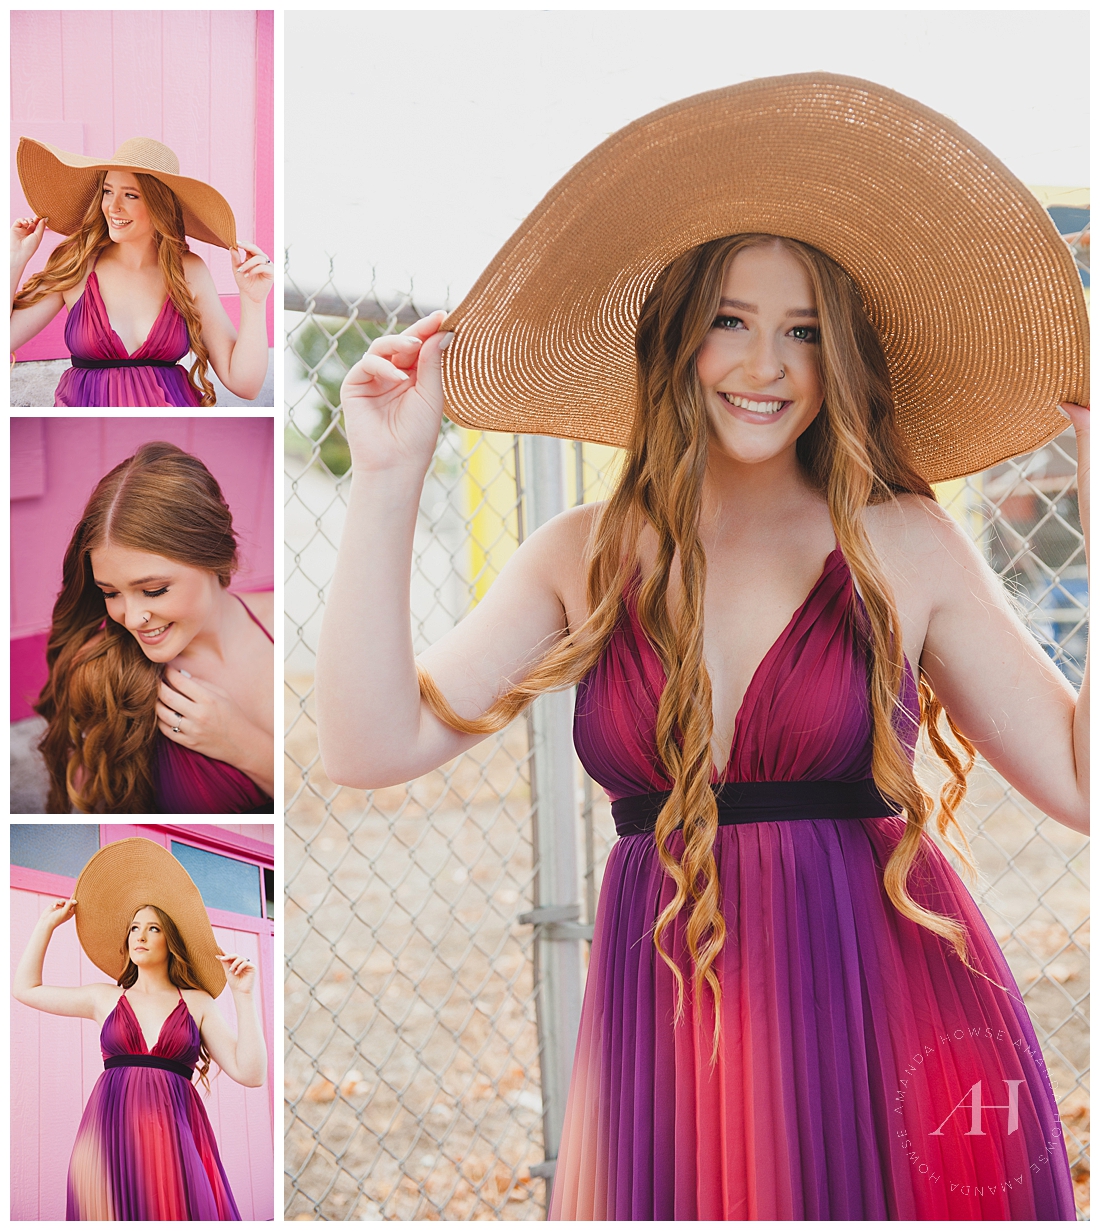 Ombre Pleated Dress and Big Floppy Hat for Senior Portraits | Glam Senior Portraits in Tacoma, Fun Outfit Ideas, Senior Portraits with a Pink Wall | Photographed by the Best Tacoma Senior Portrait Photographer Amanda Howse Photography